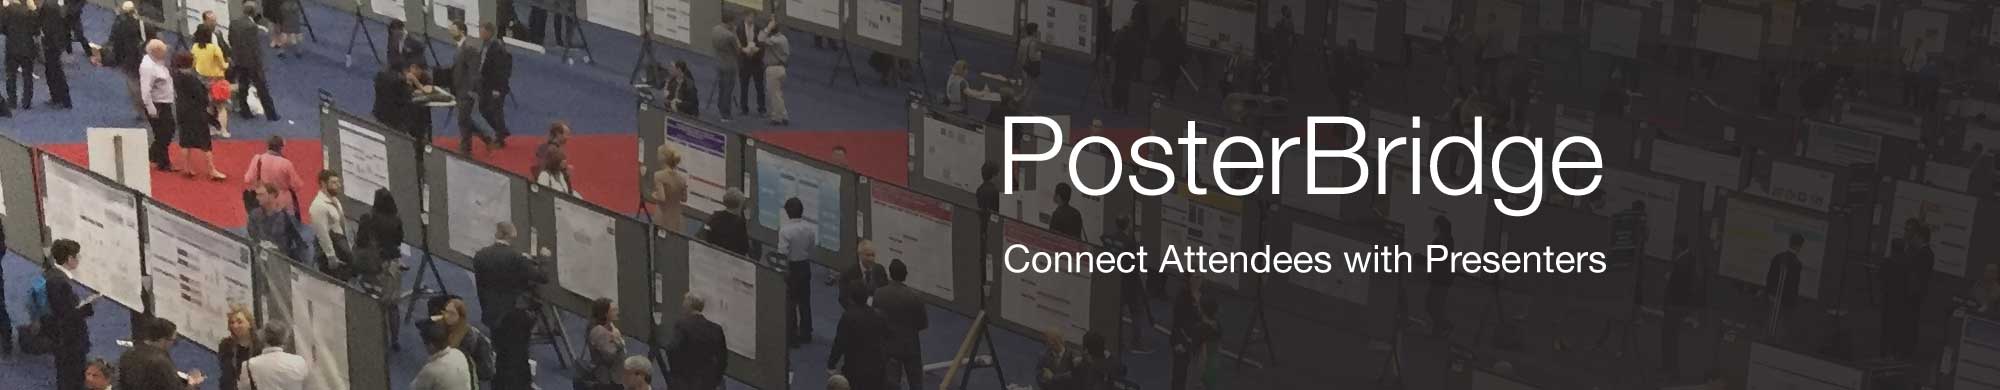 Connect attendees with poster presenters